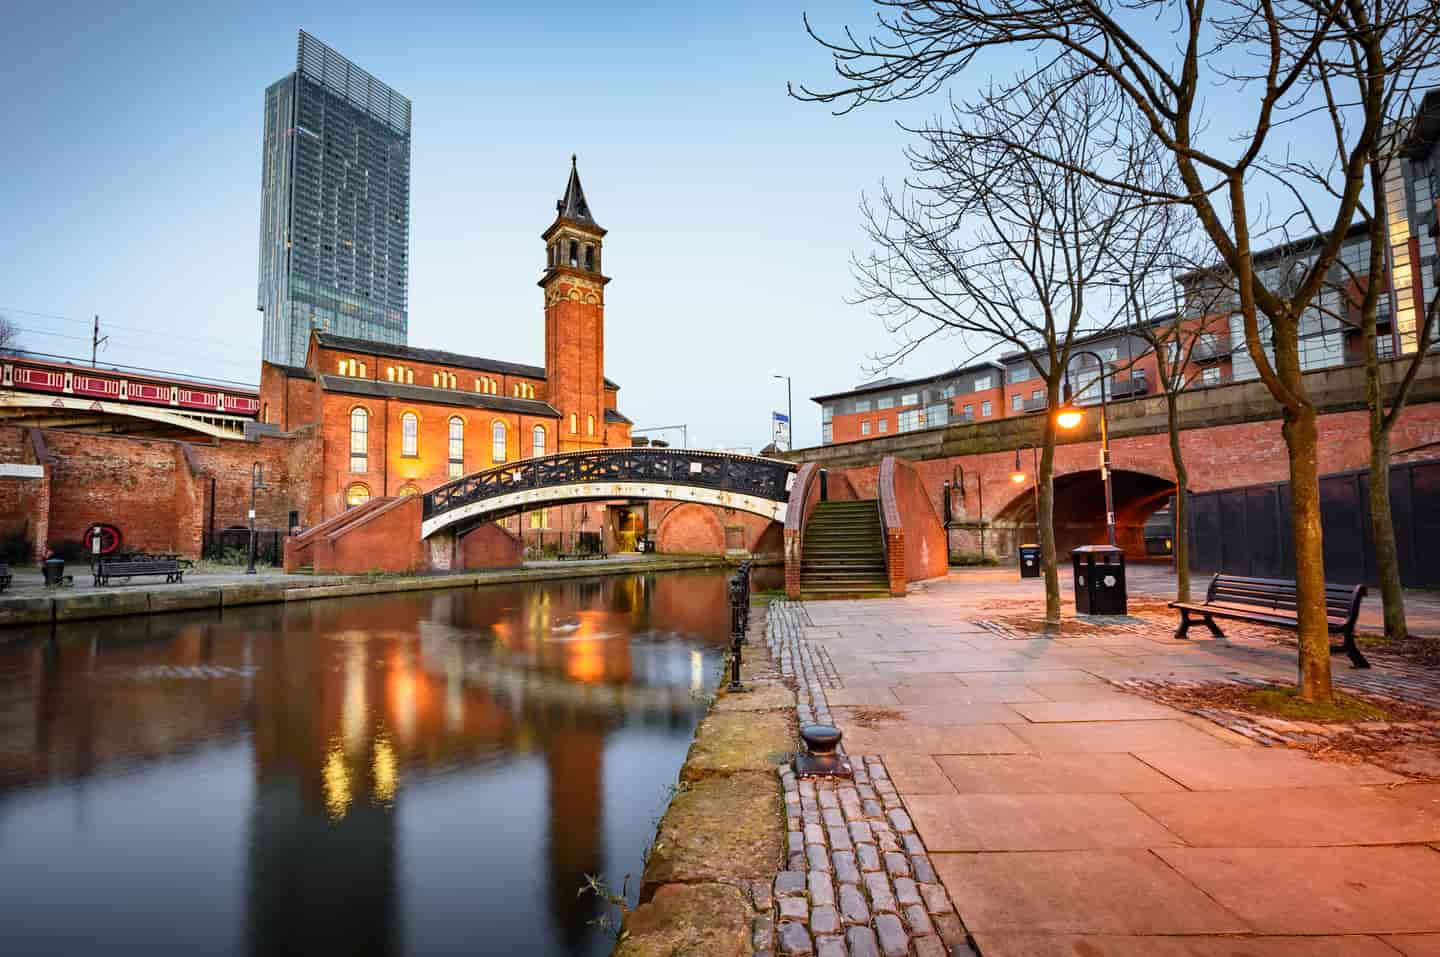 Student Accommodation in Manchester - An Iron Bridge in Castlefield with Beetham Tower in the background